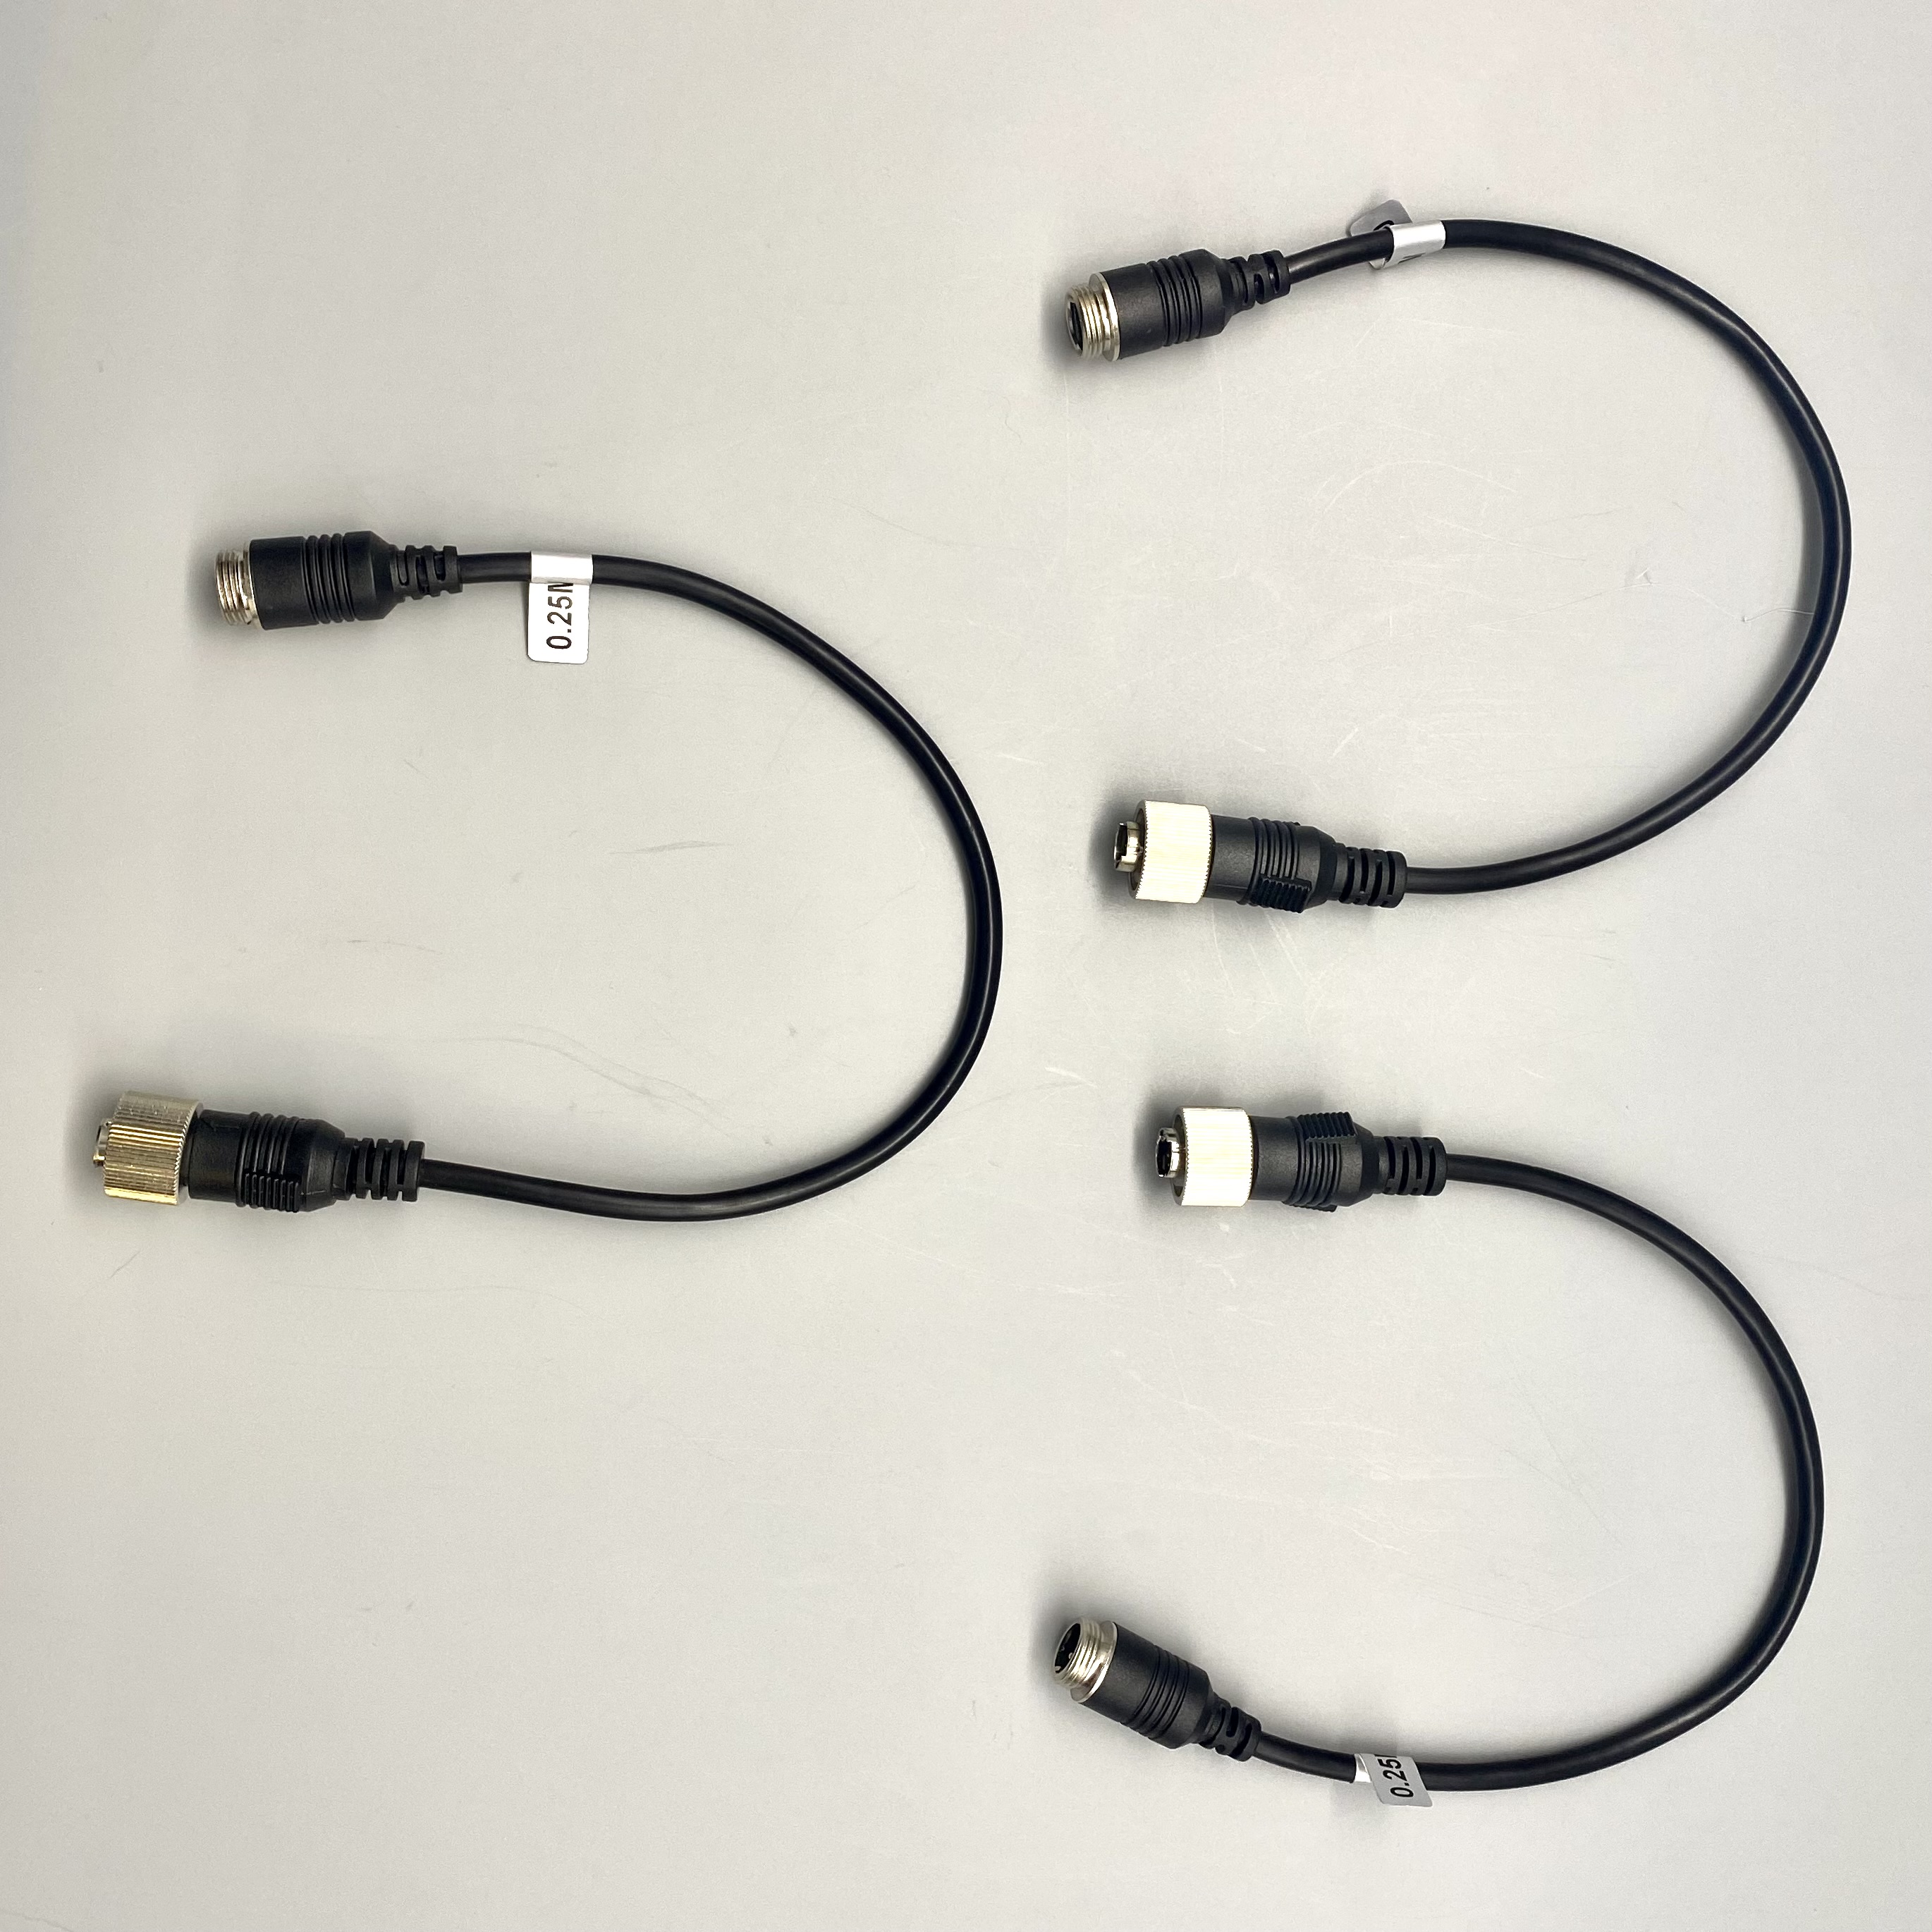 Adapter: Allows Zone Defense camera to connect to locking 4-pin mini-din cable